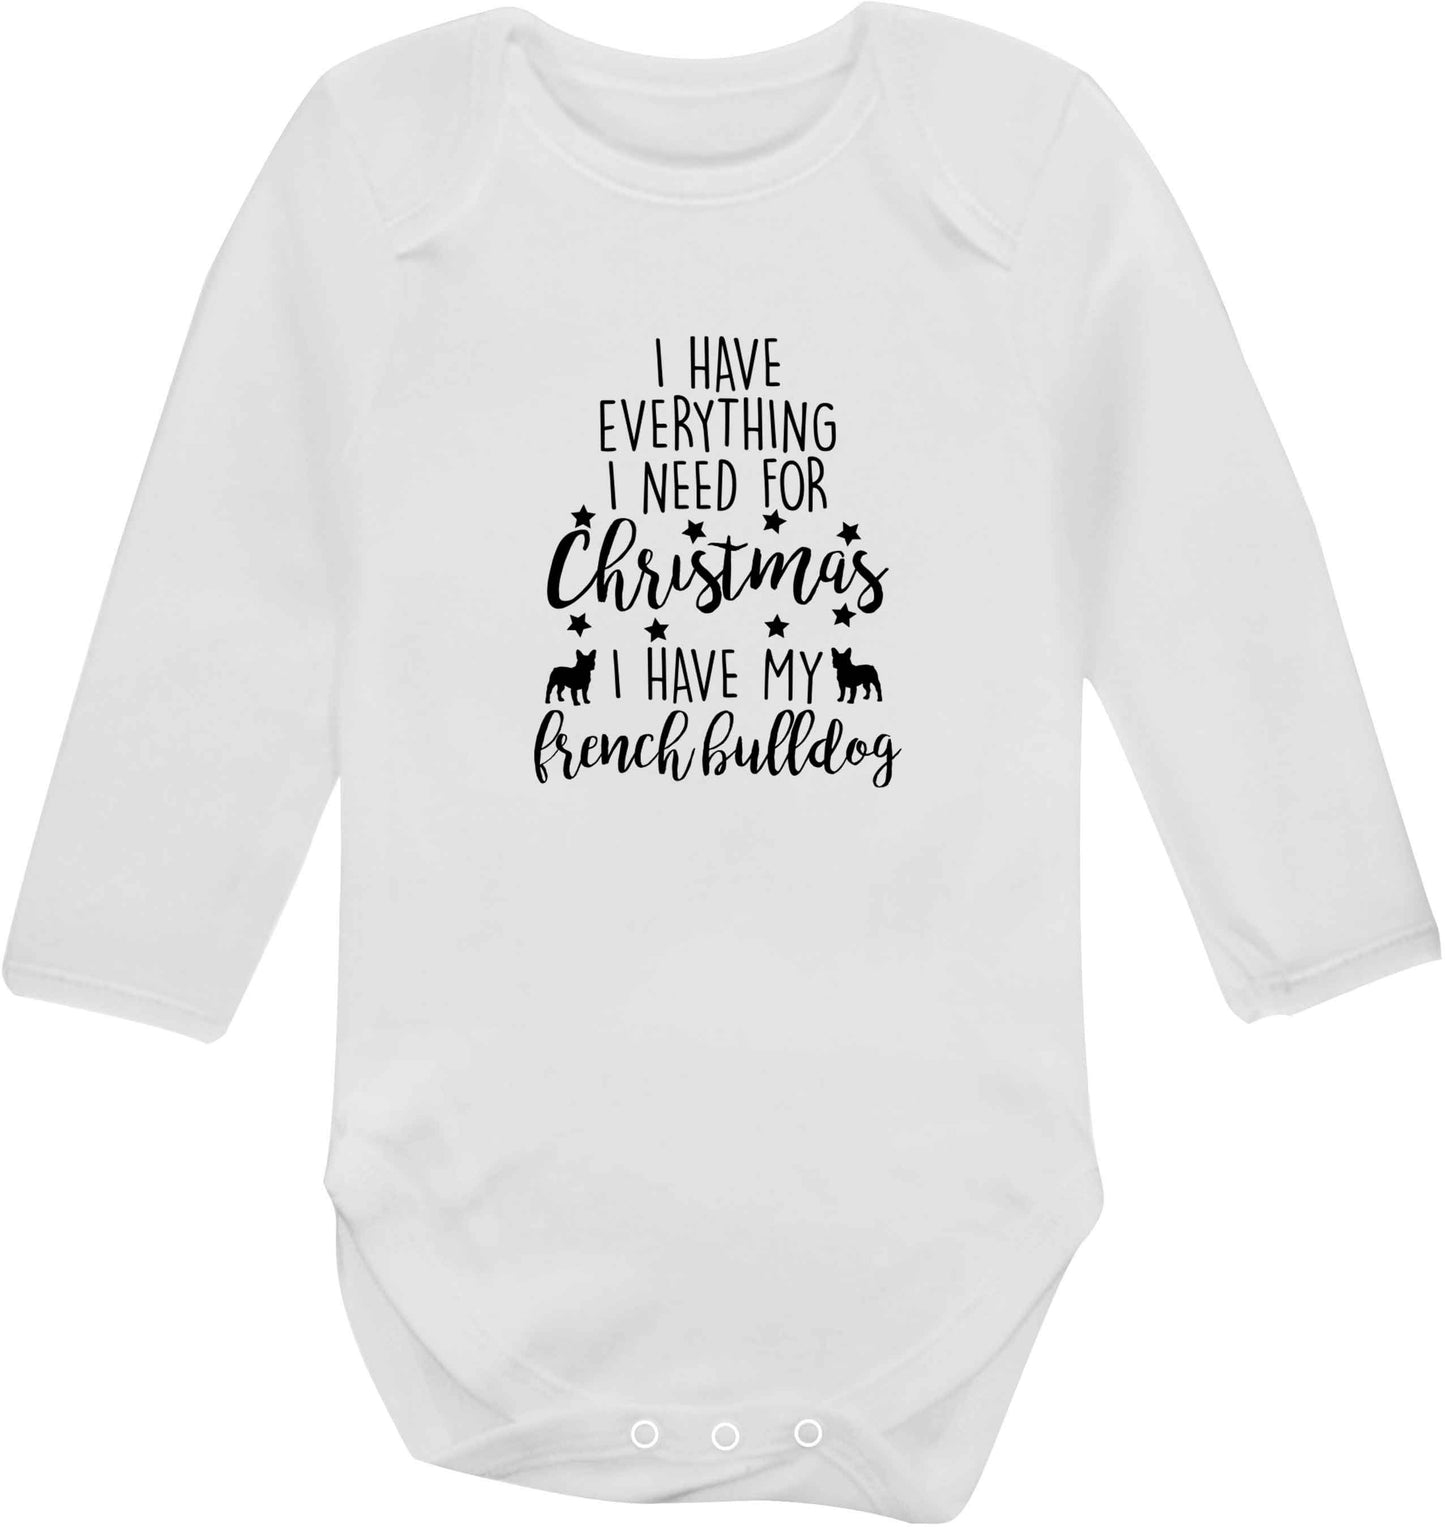 I have everything I need for Christmas I have my french bulldog baby vest long sleeved white 6-12 months